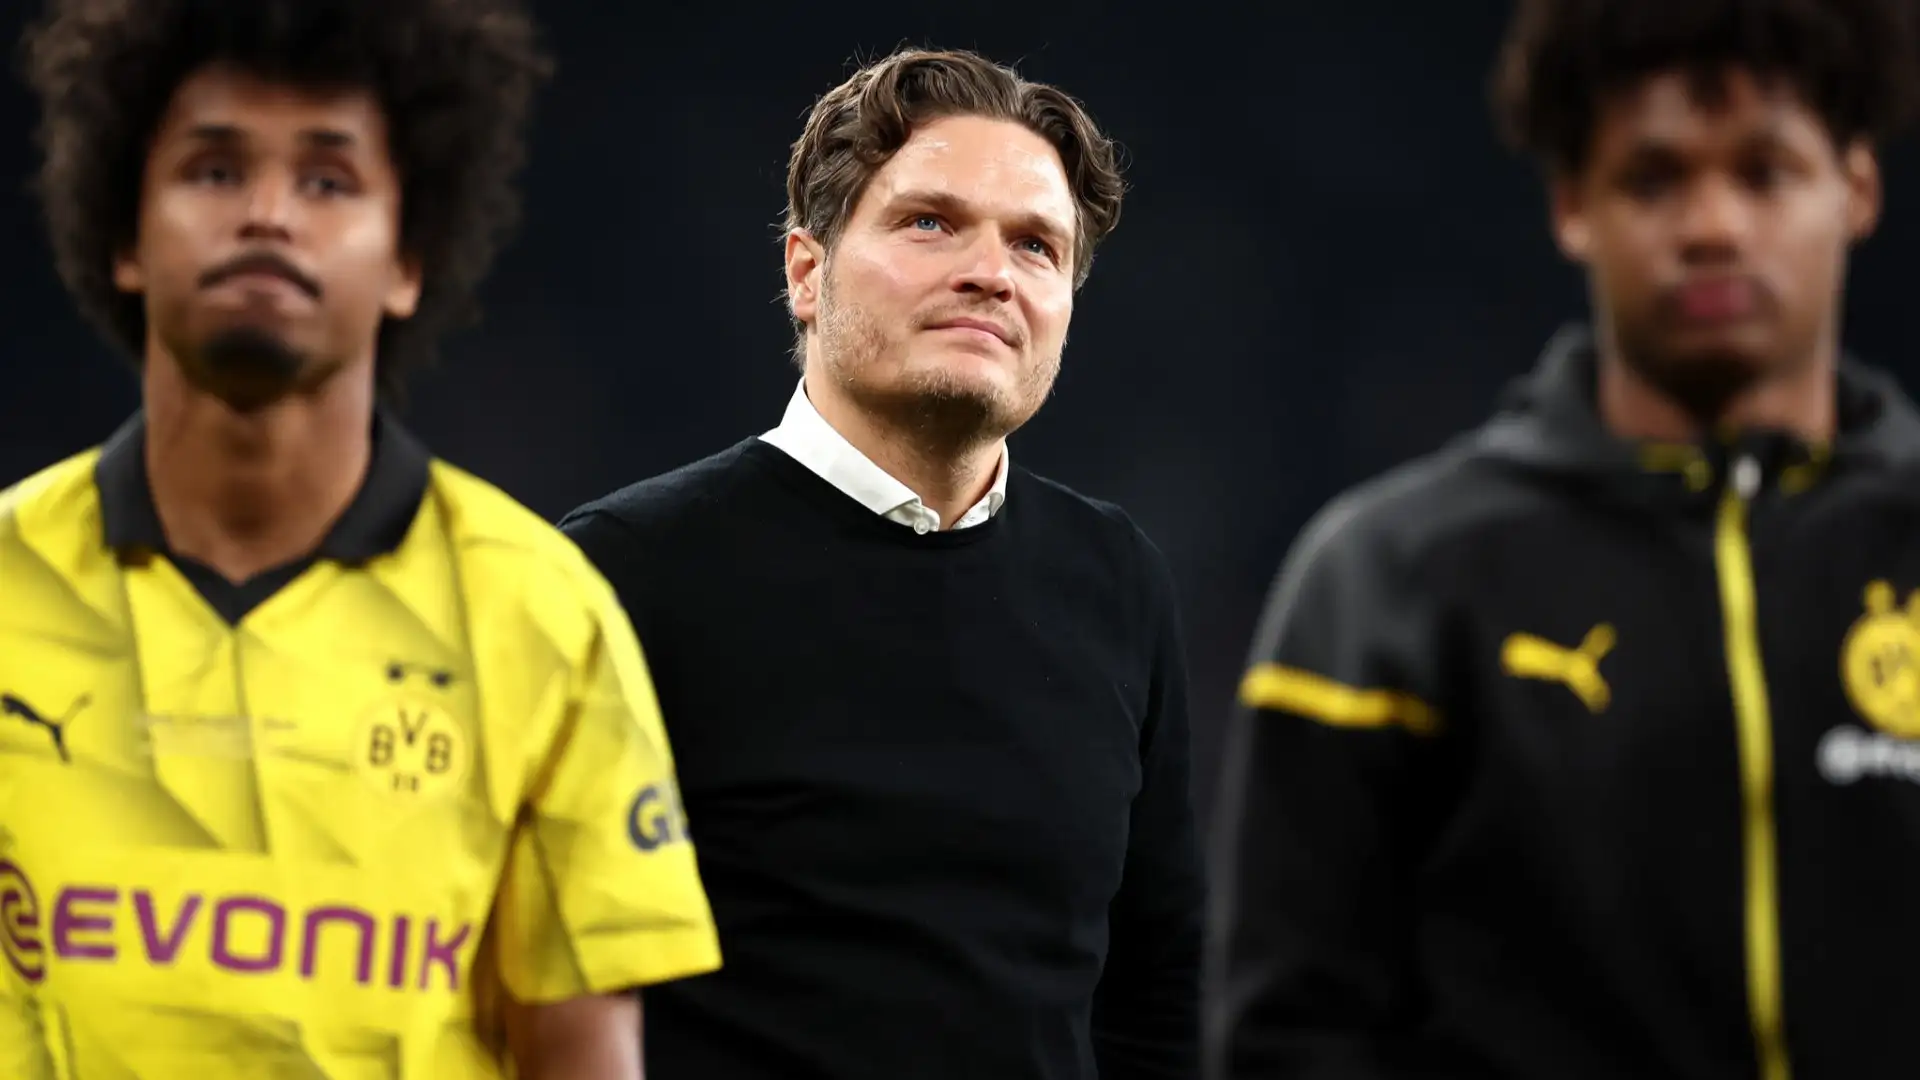 Have Borussia Dortmund already found Edin Terzic's replacement? Club legend in place to step into German side's hot seat after coach's surprise exit